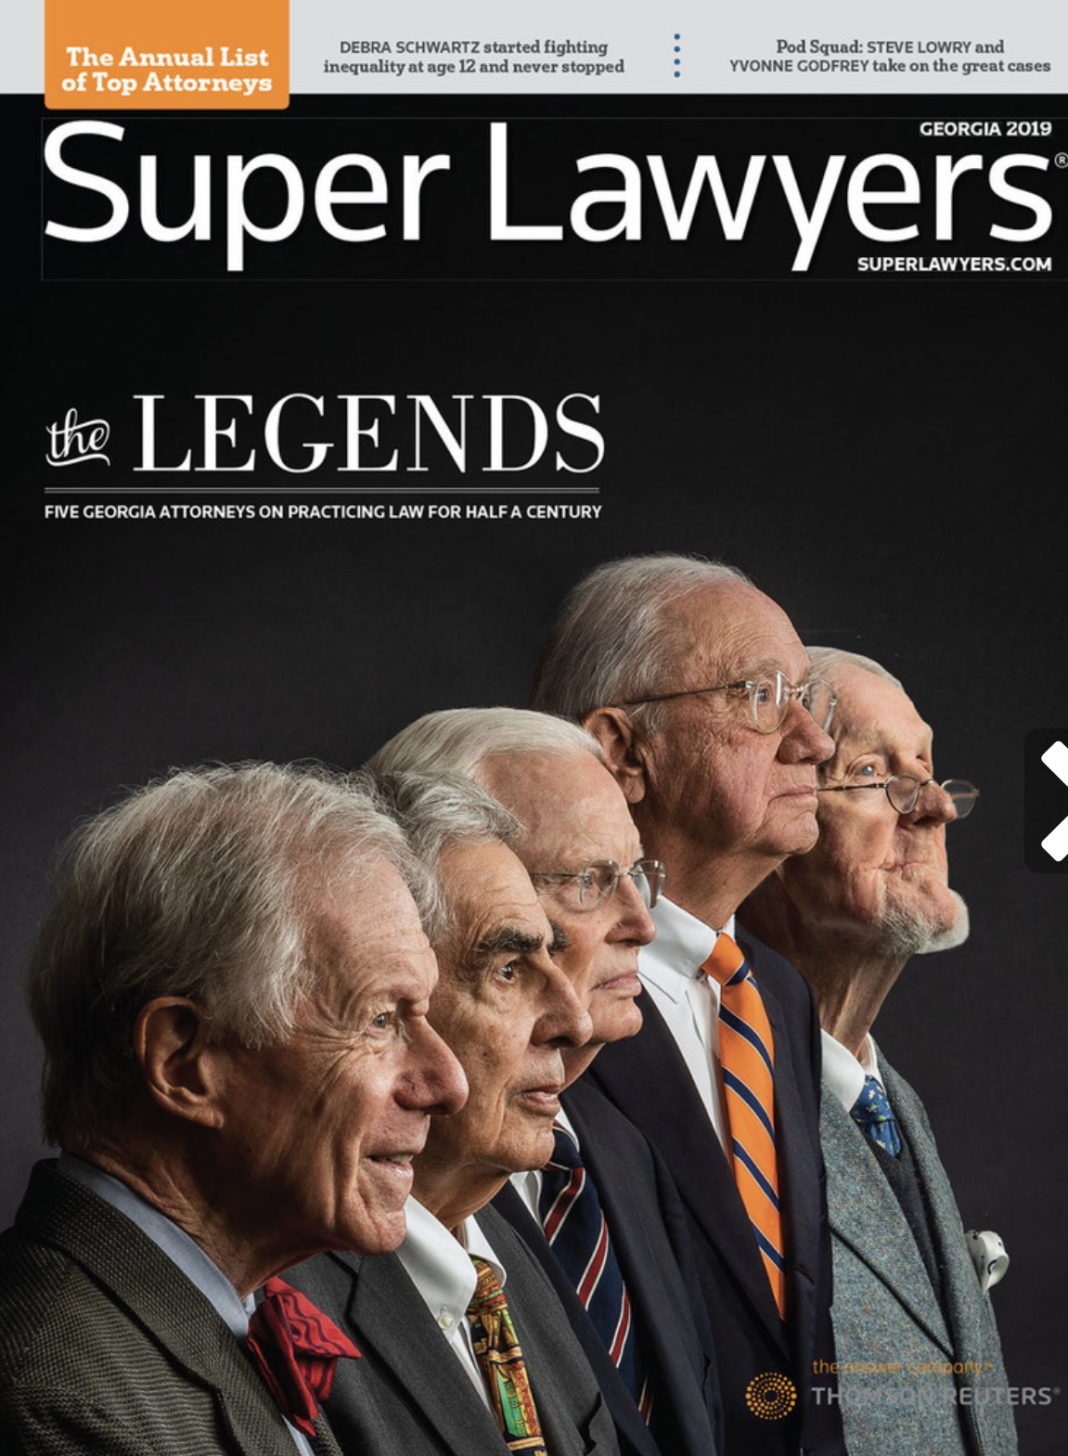 Bobby Lee Cook featured in Super Lawyers Magazine